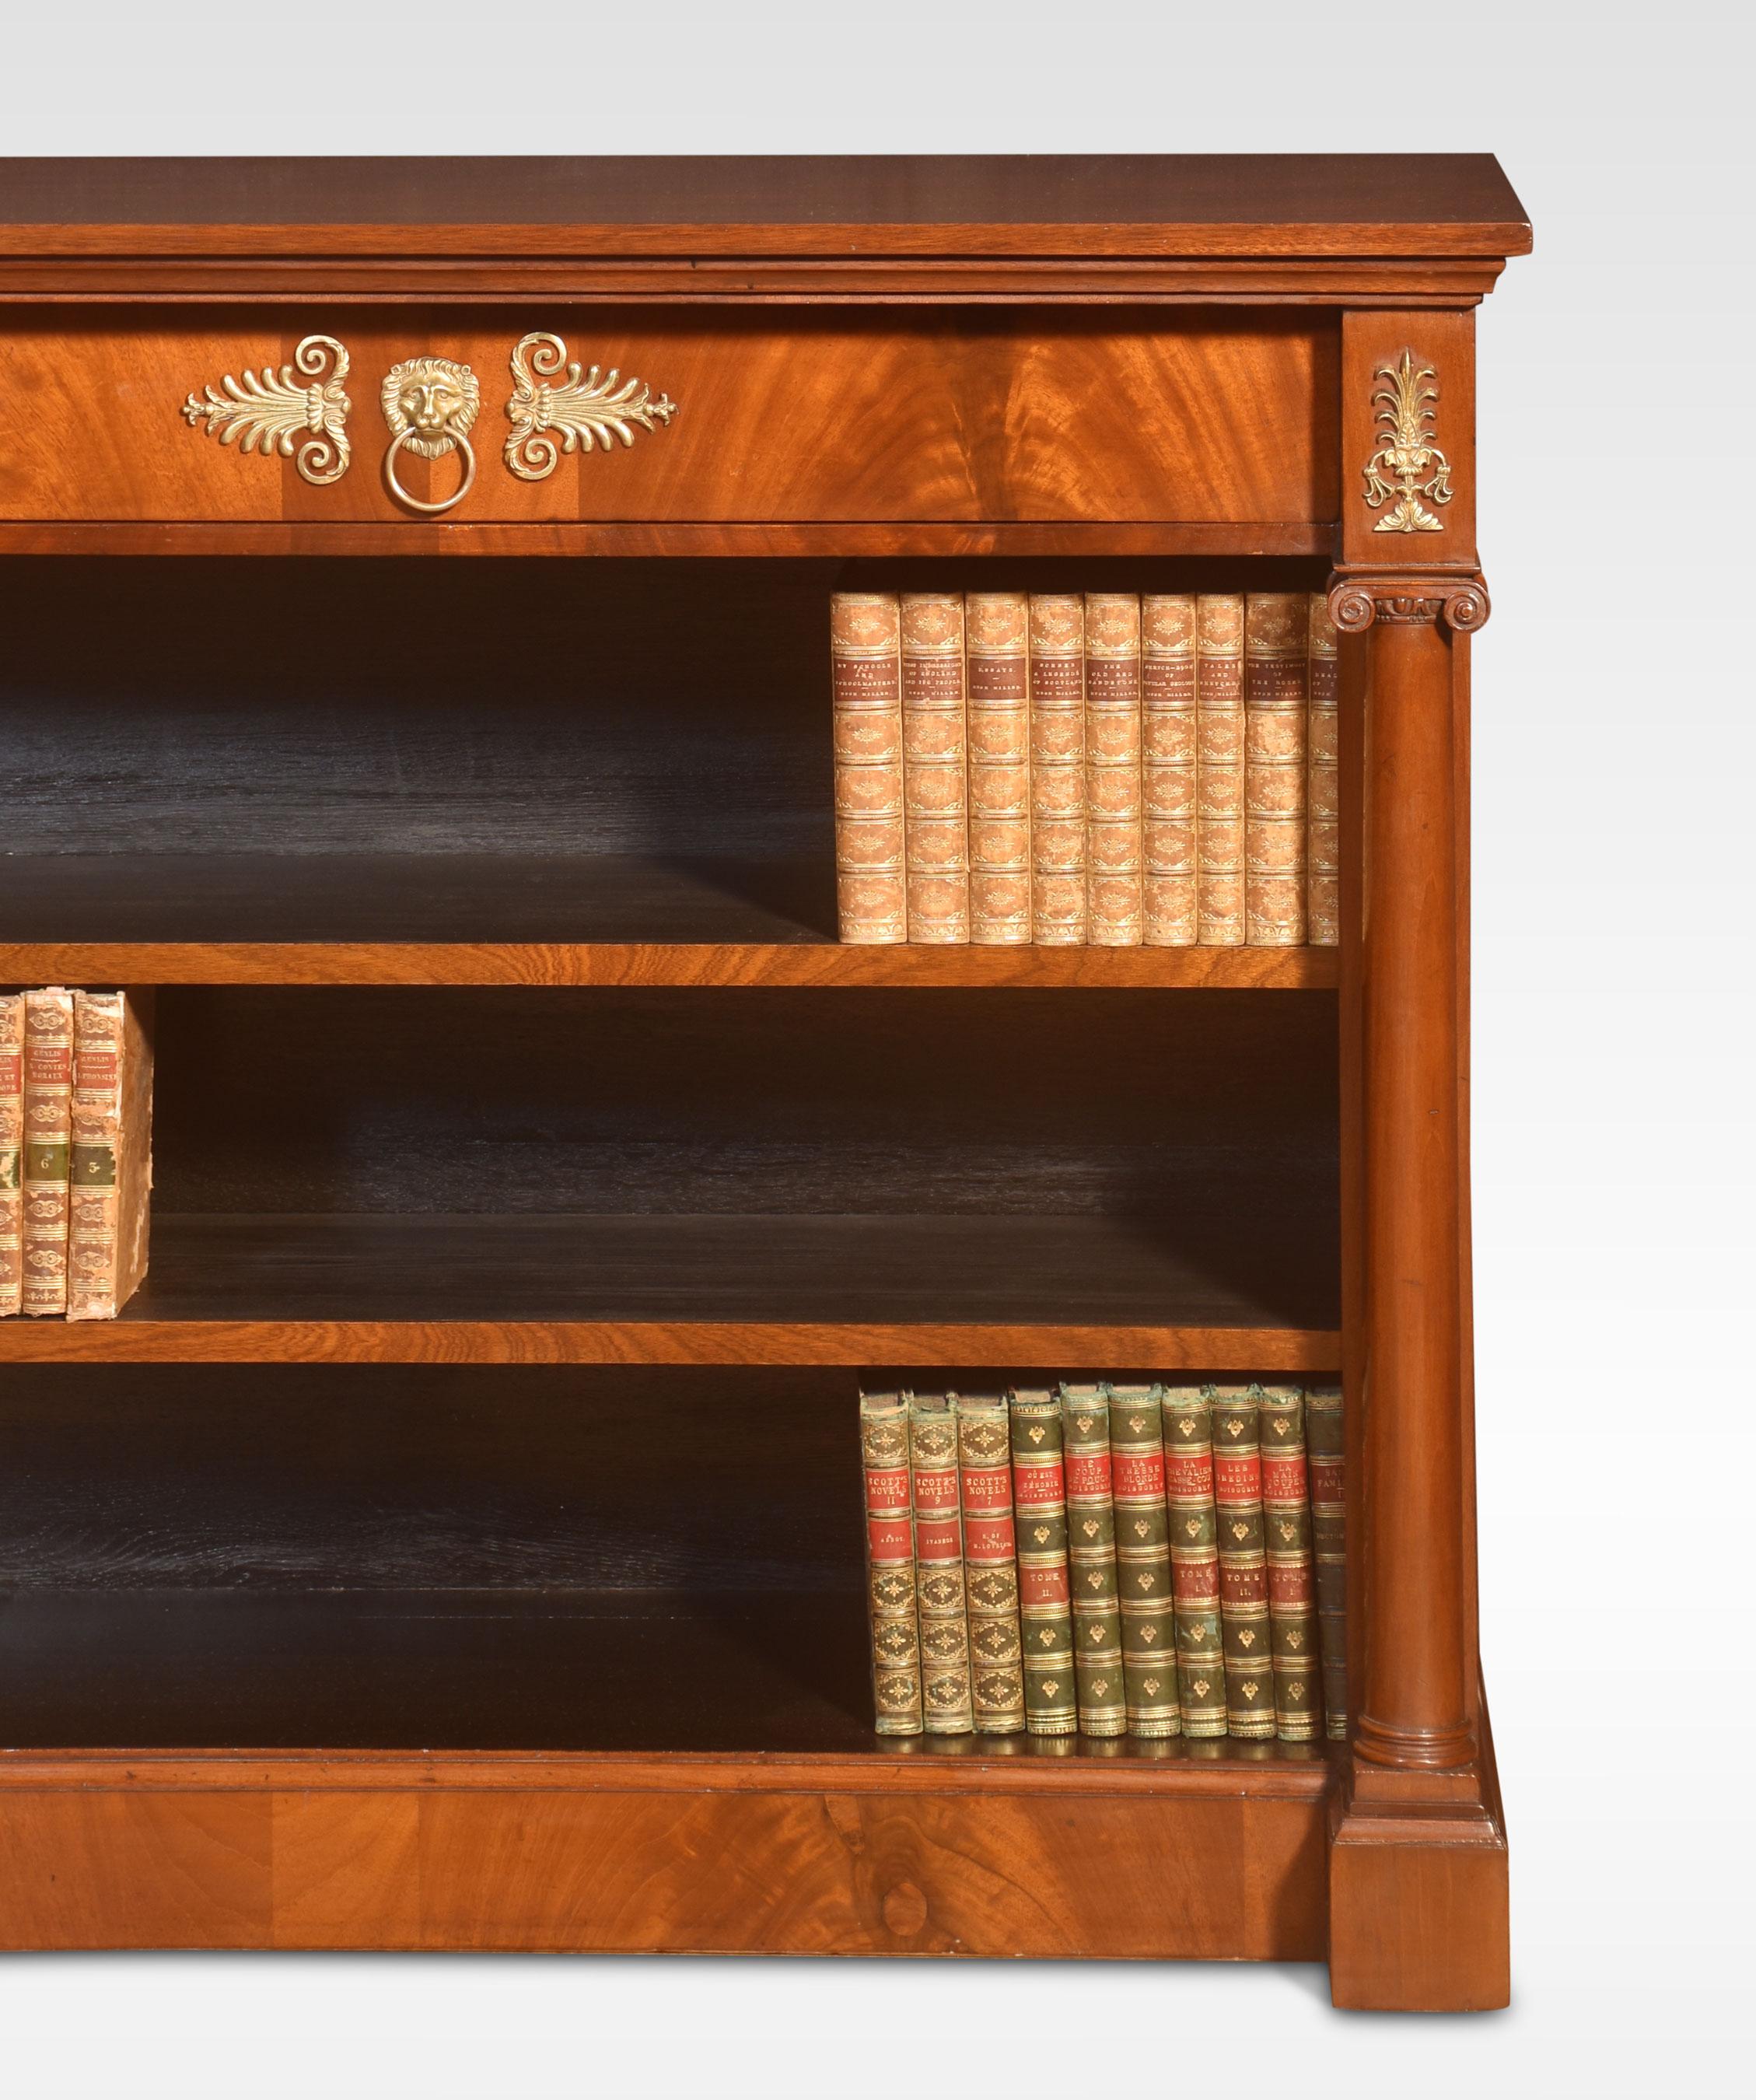 Mahogany open bookcase the rectangular well-figured top above large freeze drawer with central brass motif. To the adjustable shelved interior flanked by circular columns with brass capitals. All raised up on a plinth base.
Dimensions
Height 36.5